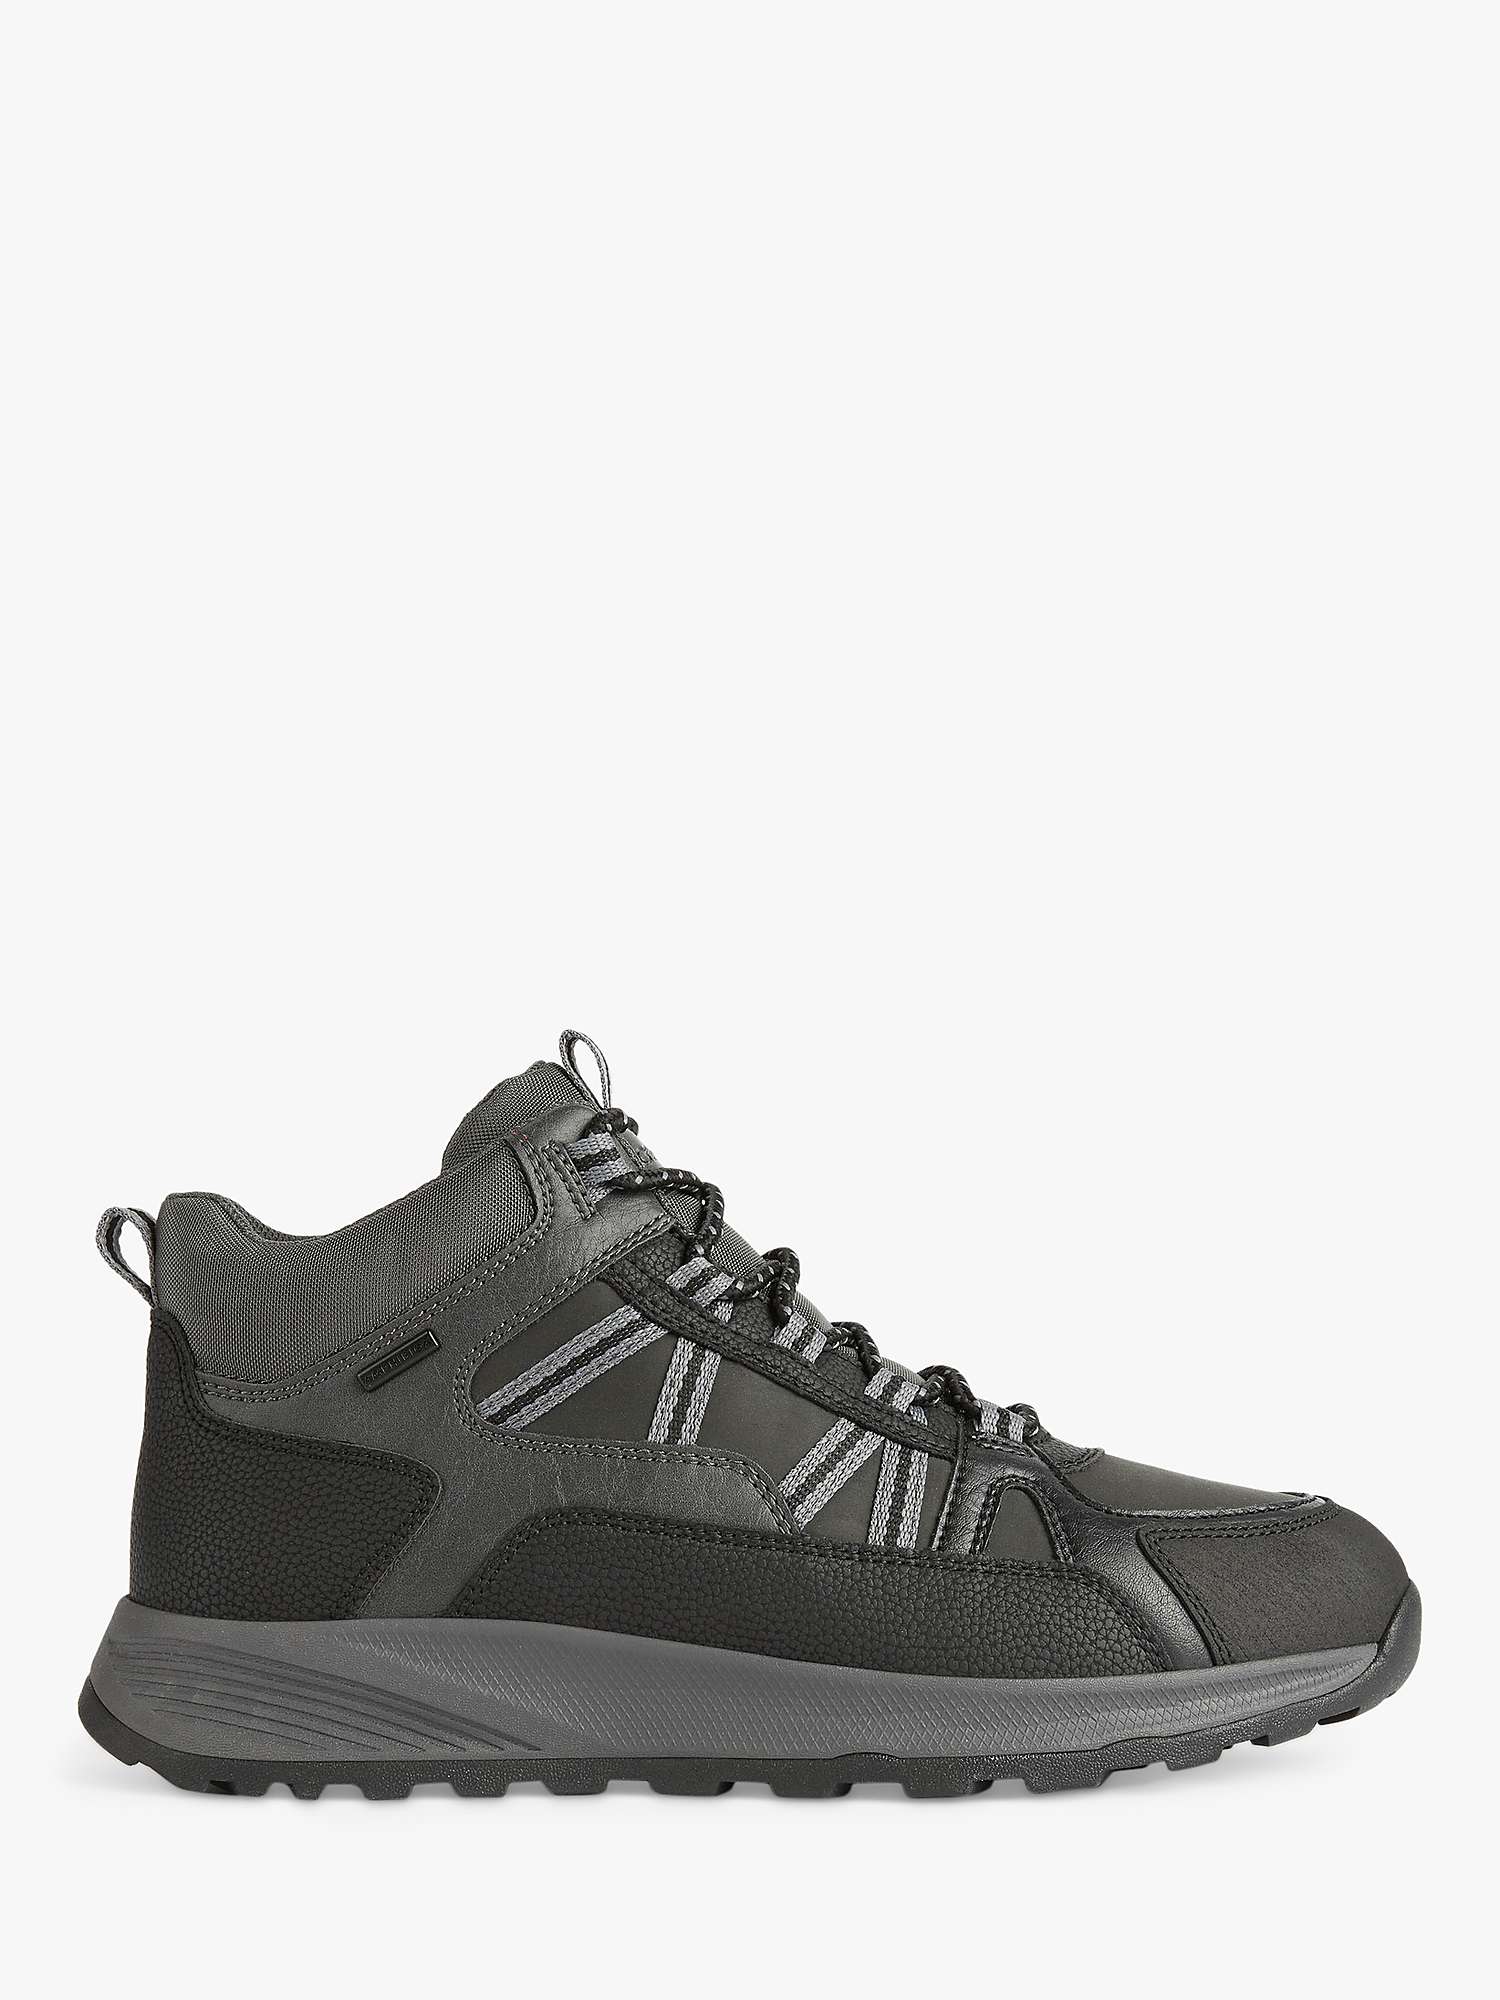 Asesinar Abrazadera encima Geox Terrestre Leather Lace Up Walking Shoes, Black at John Lewis & Partners